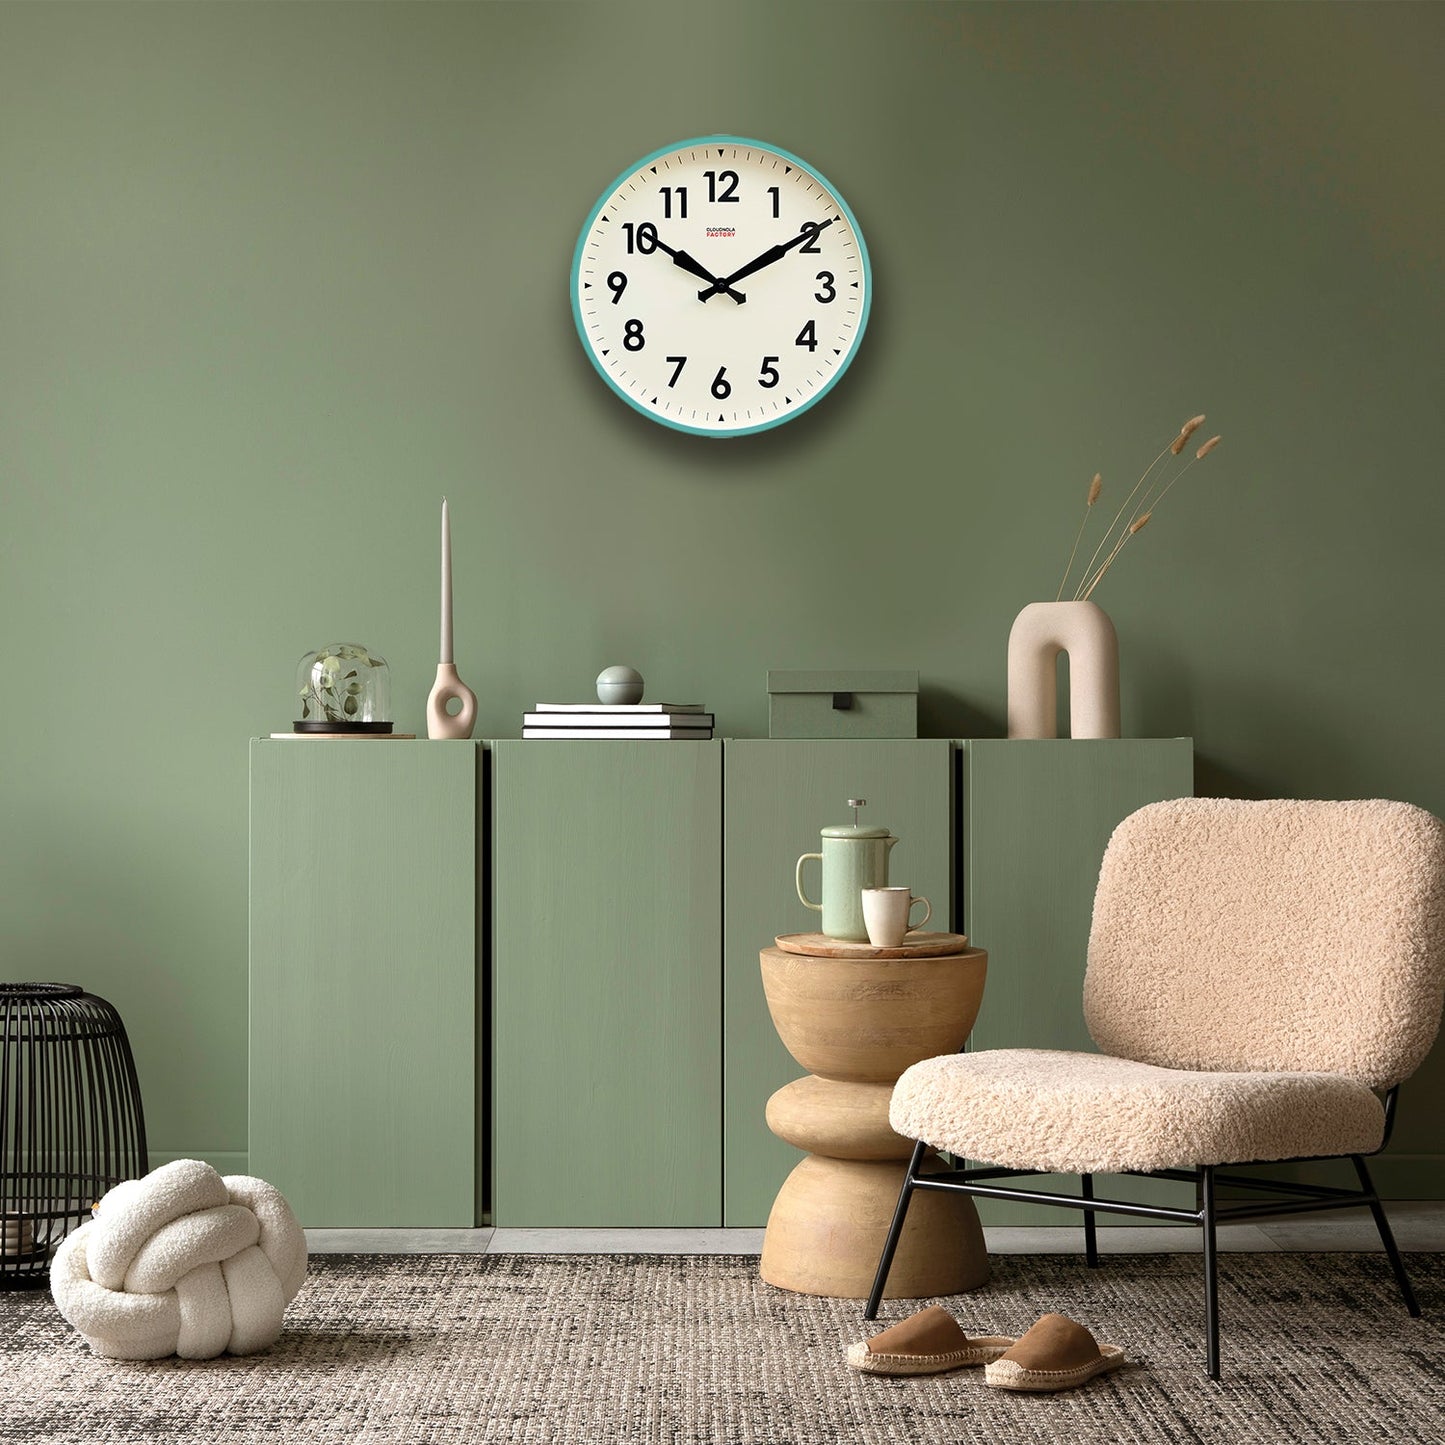 SAMPLE - Factory XL Turquoise - Wall Clock - Silent - Steel Case